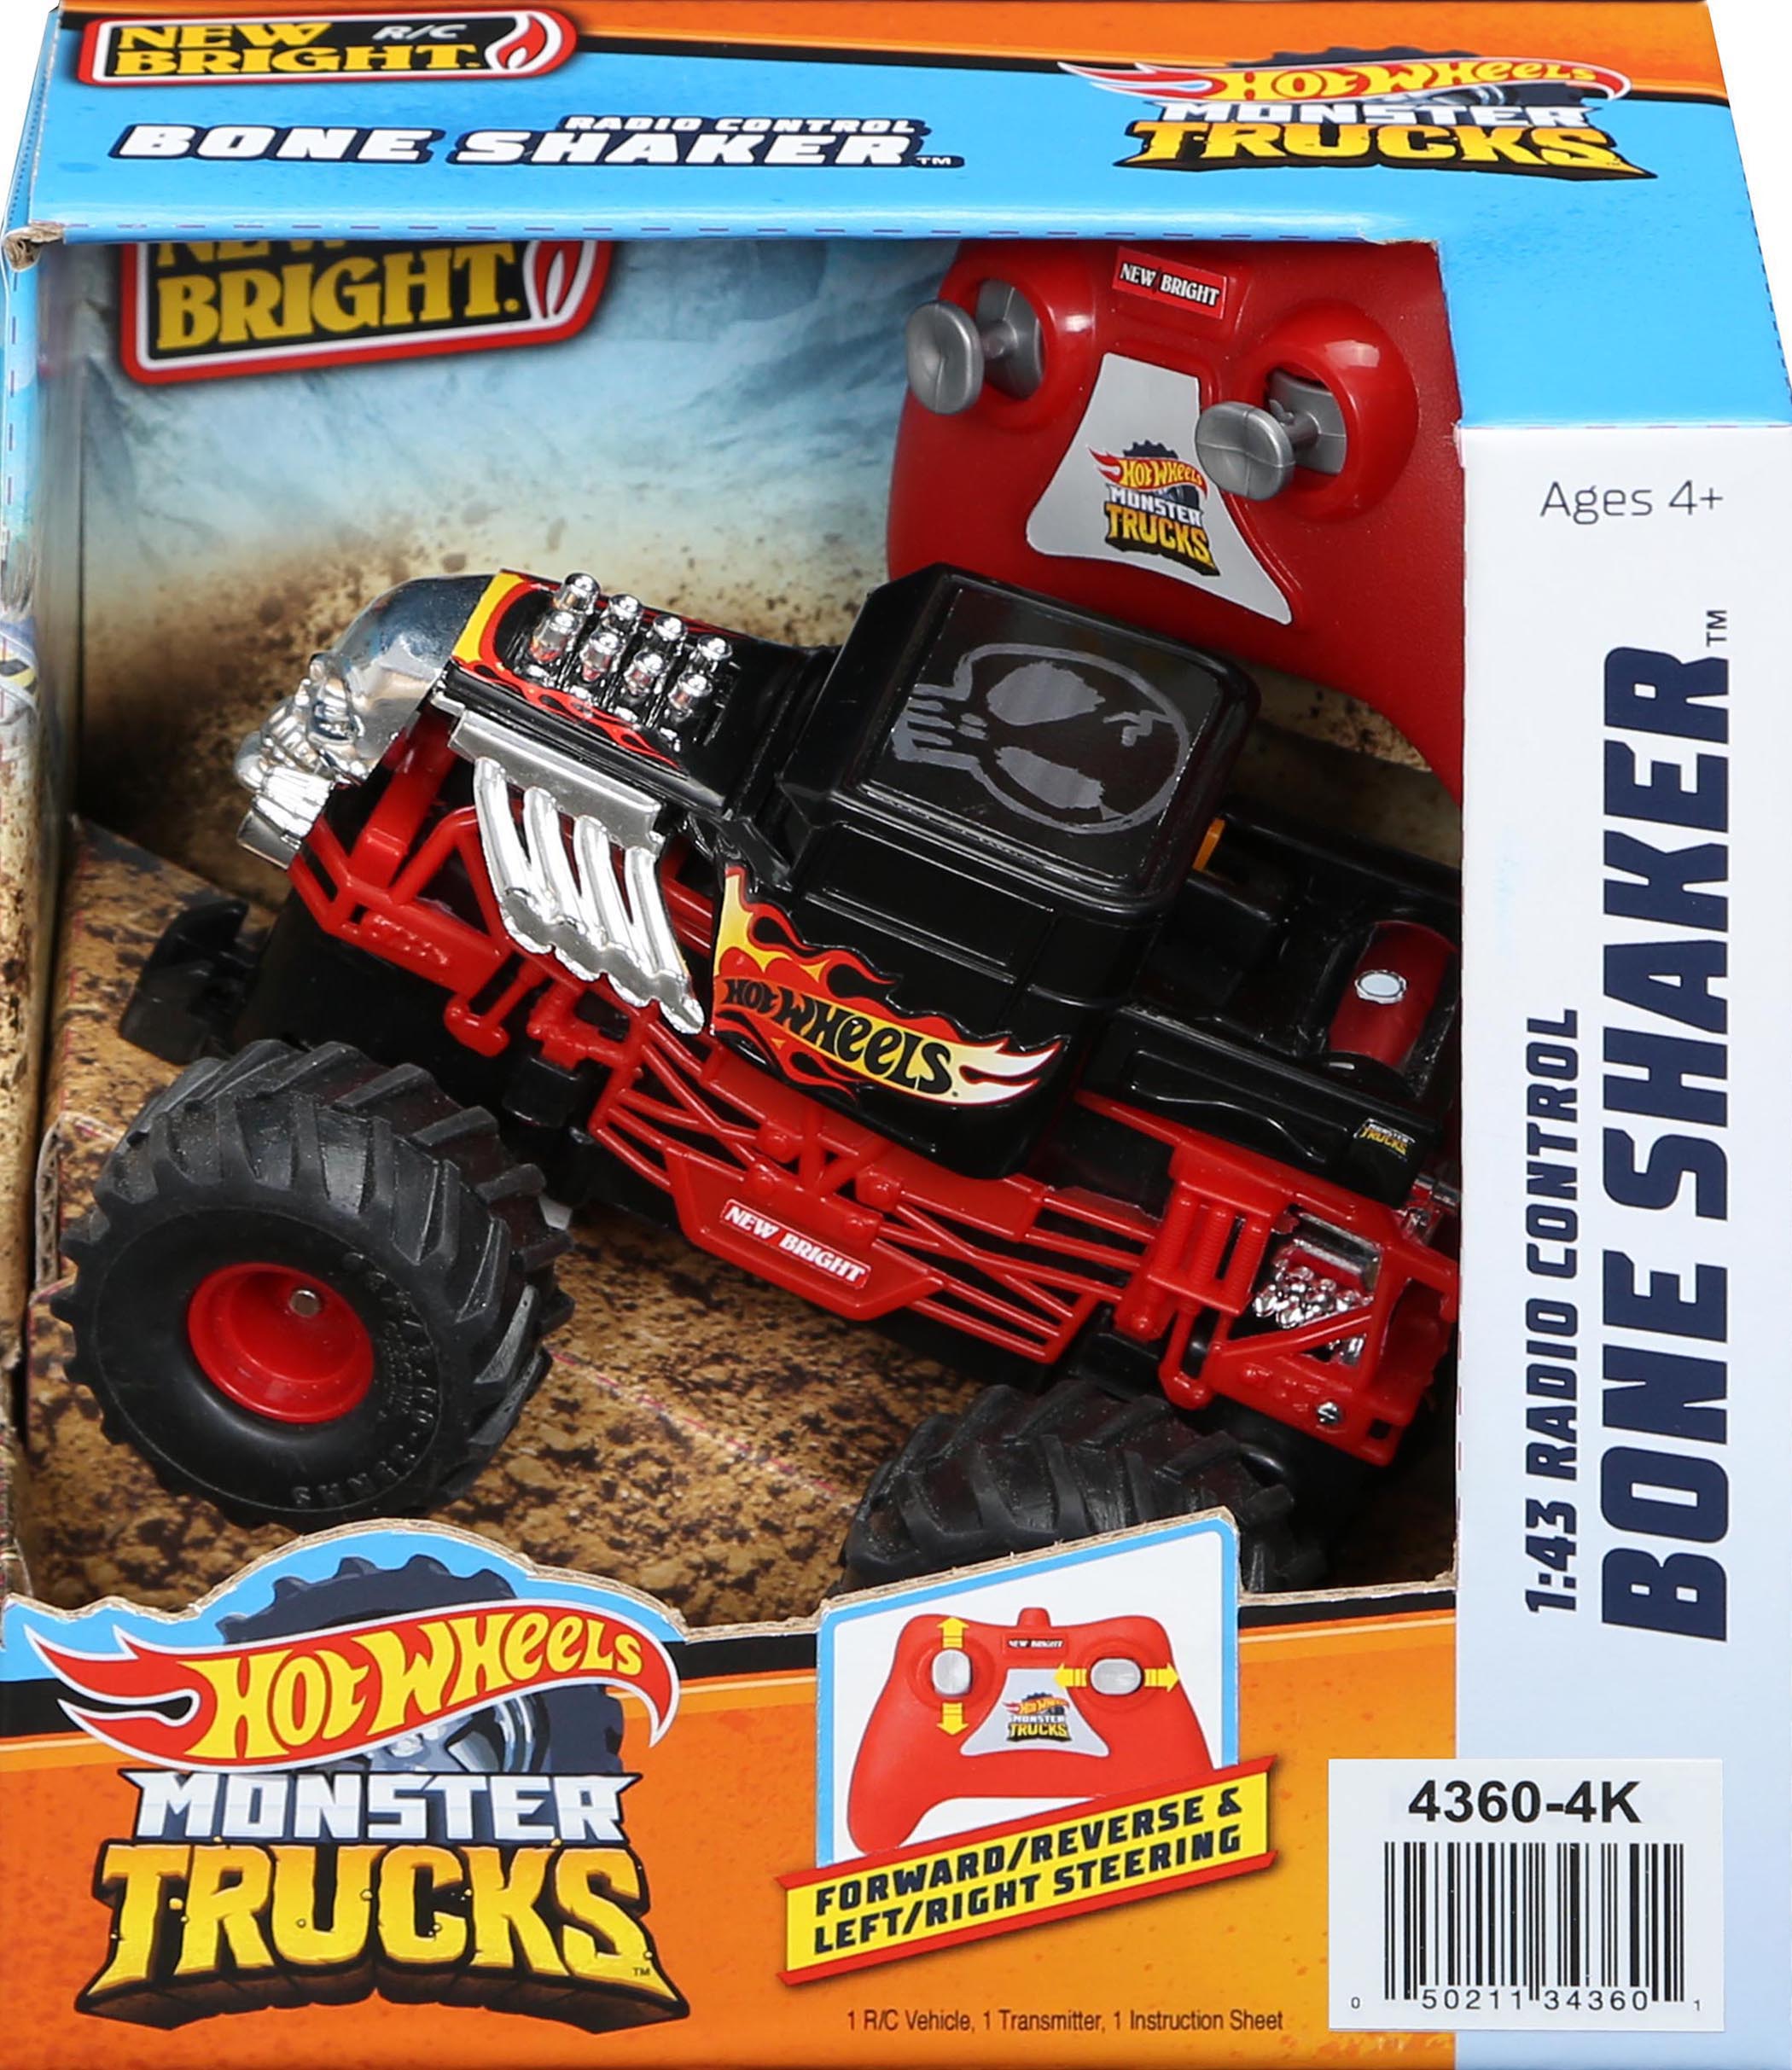 New Bright 1:43 Scale Remote Controlled Bone Shaker Monster Truck Play Vehicle - image 5 of 10